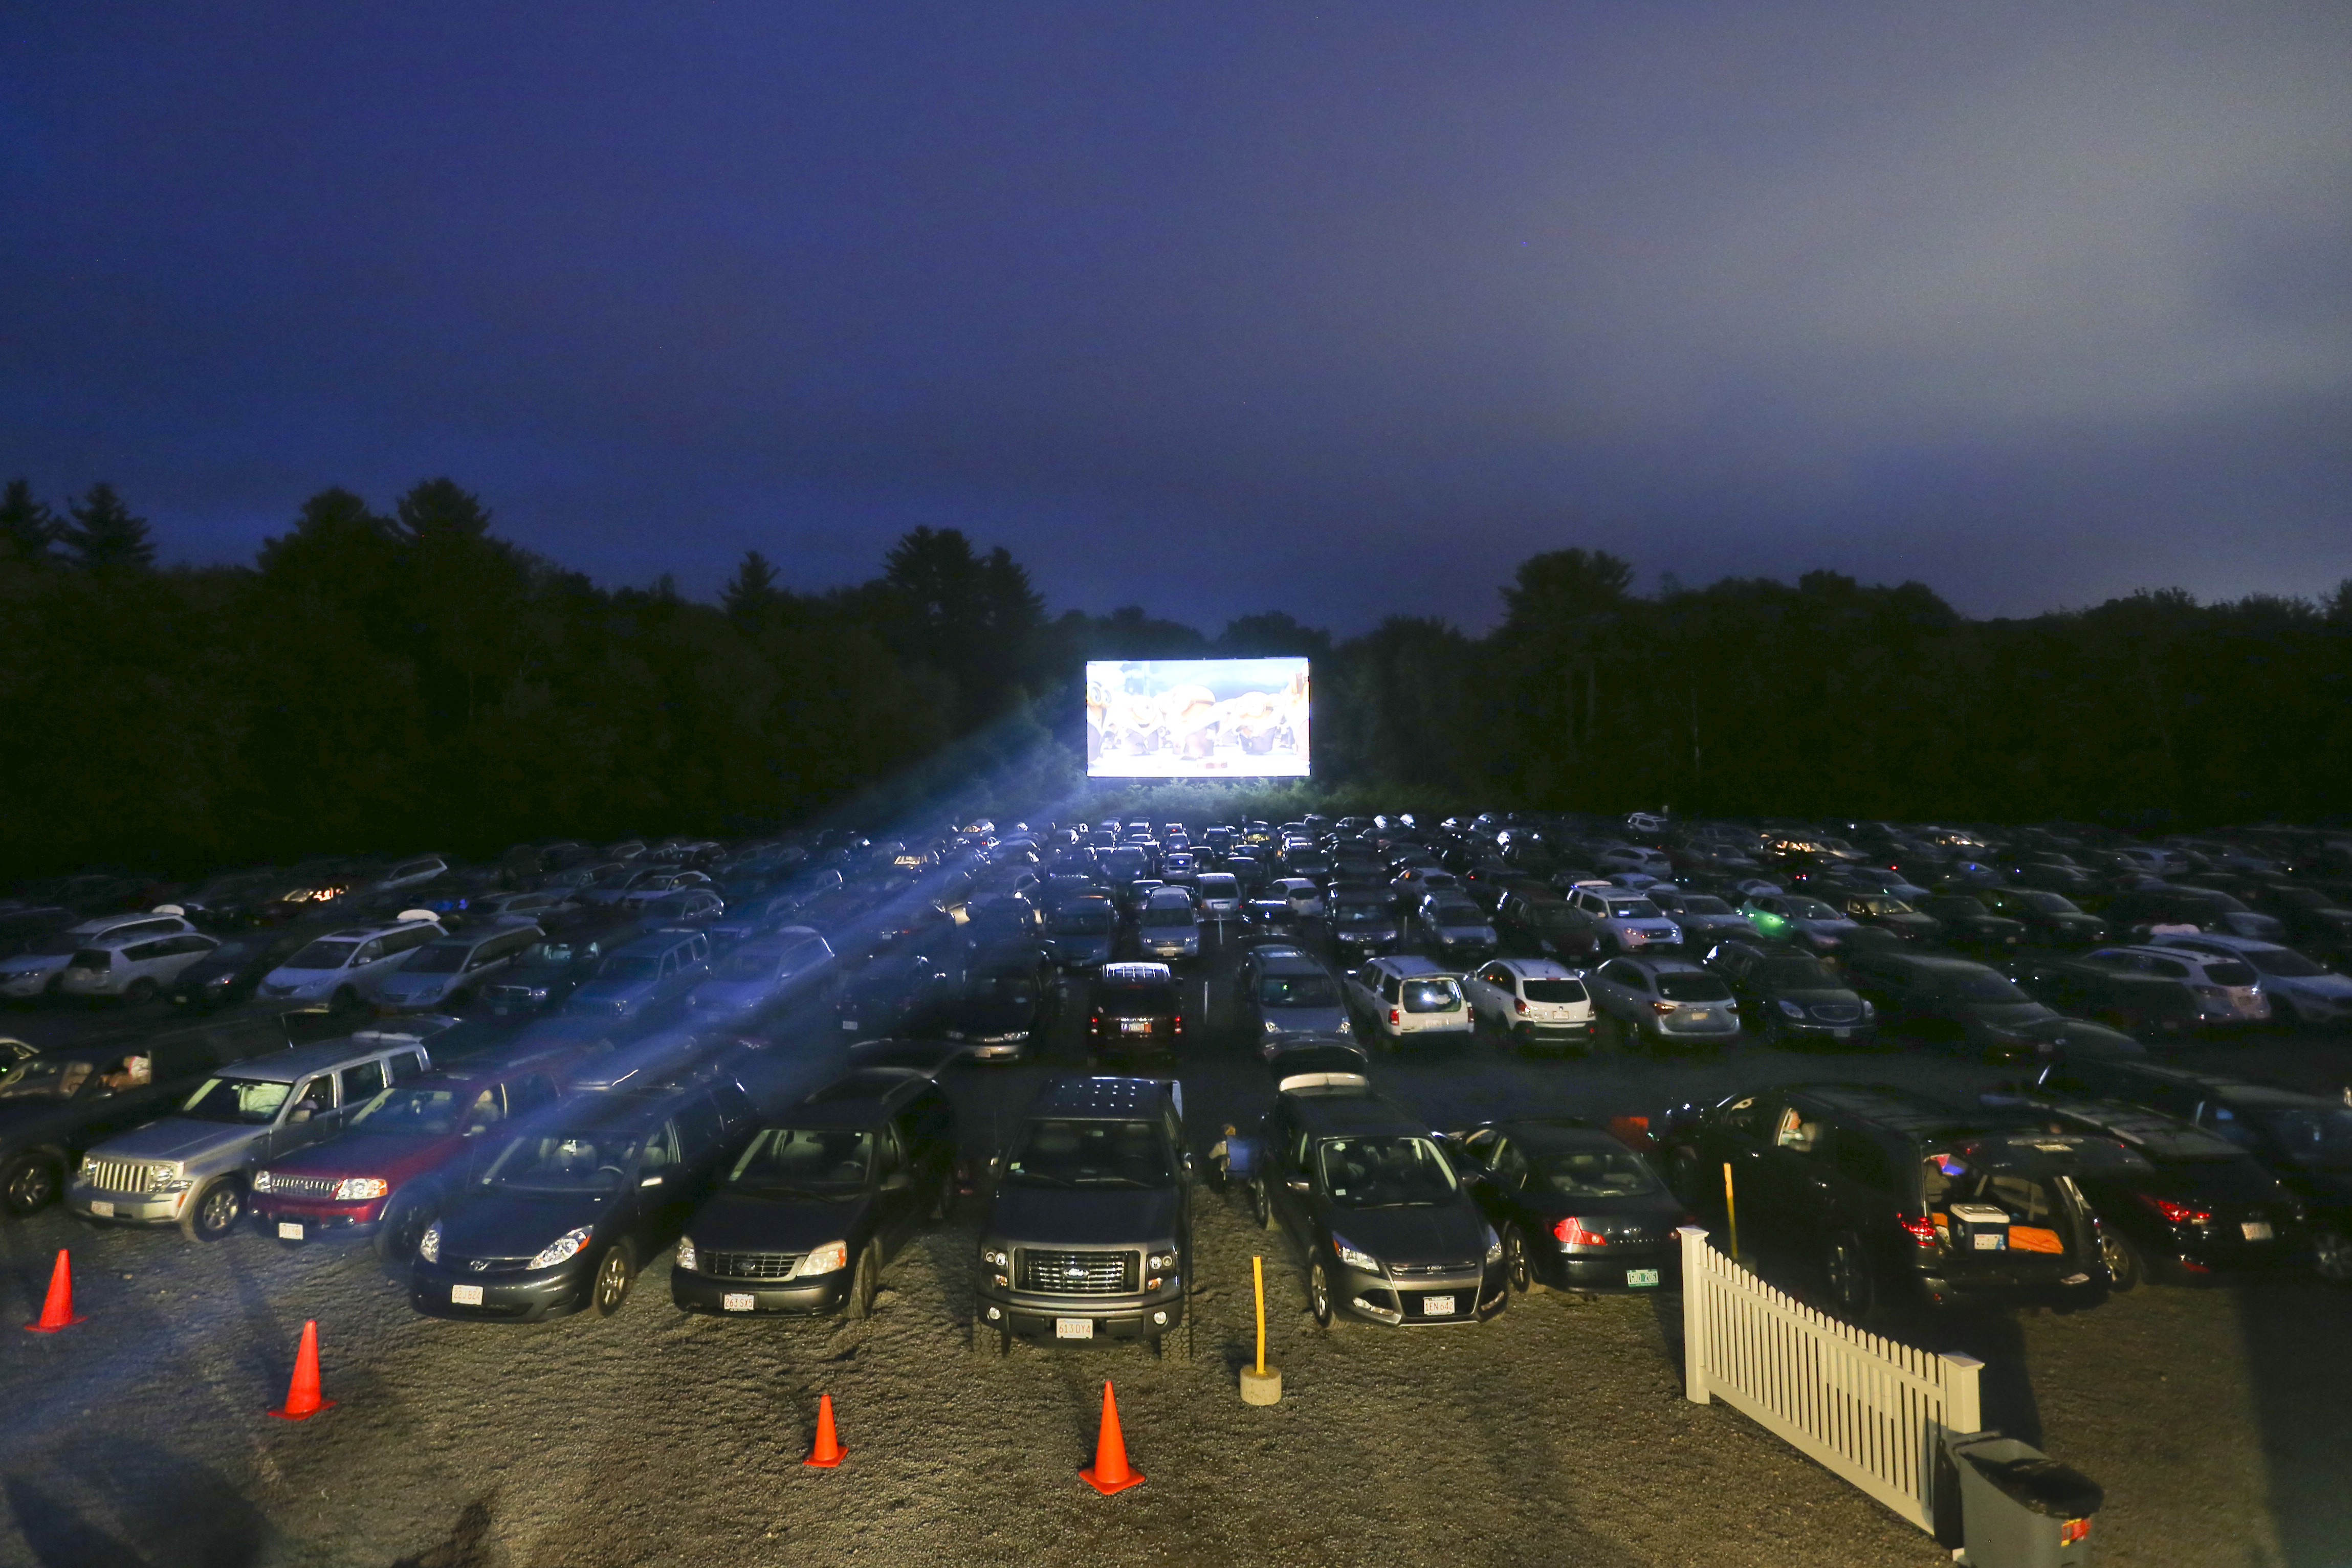 Forget to drive-out? Car left behind at a Mass. drive-in theater